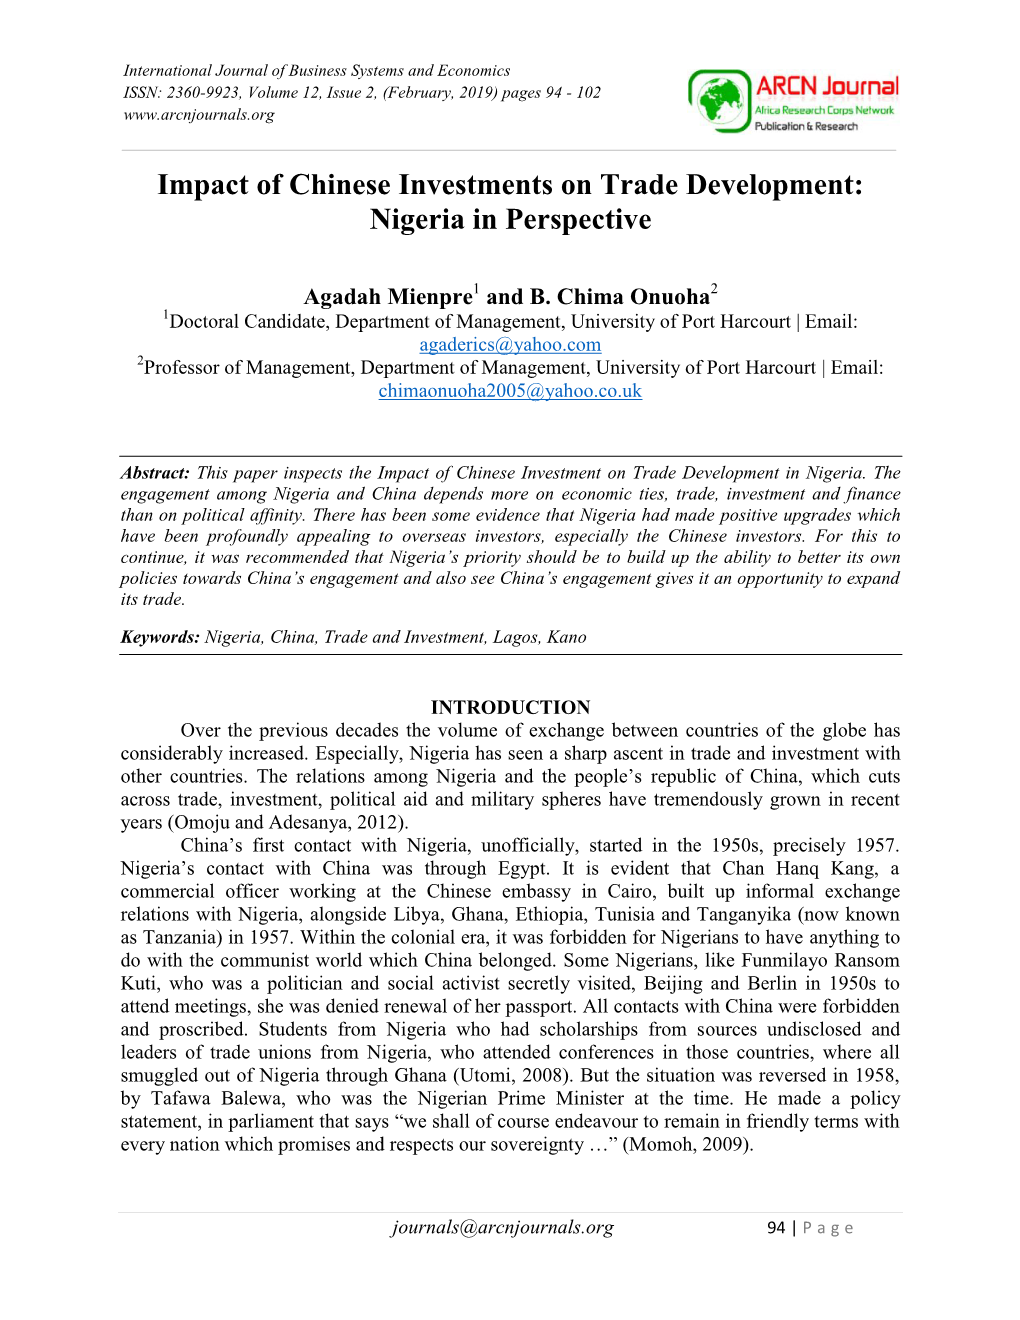 Impact of Chinese Investments on Trade Development: Nigeria in Perspective